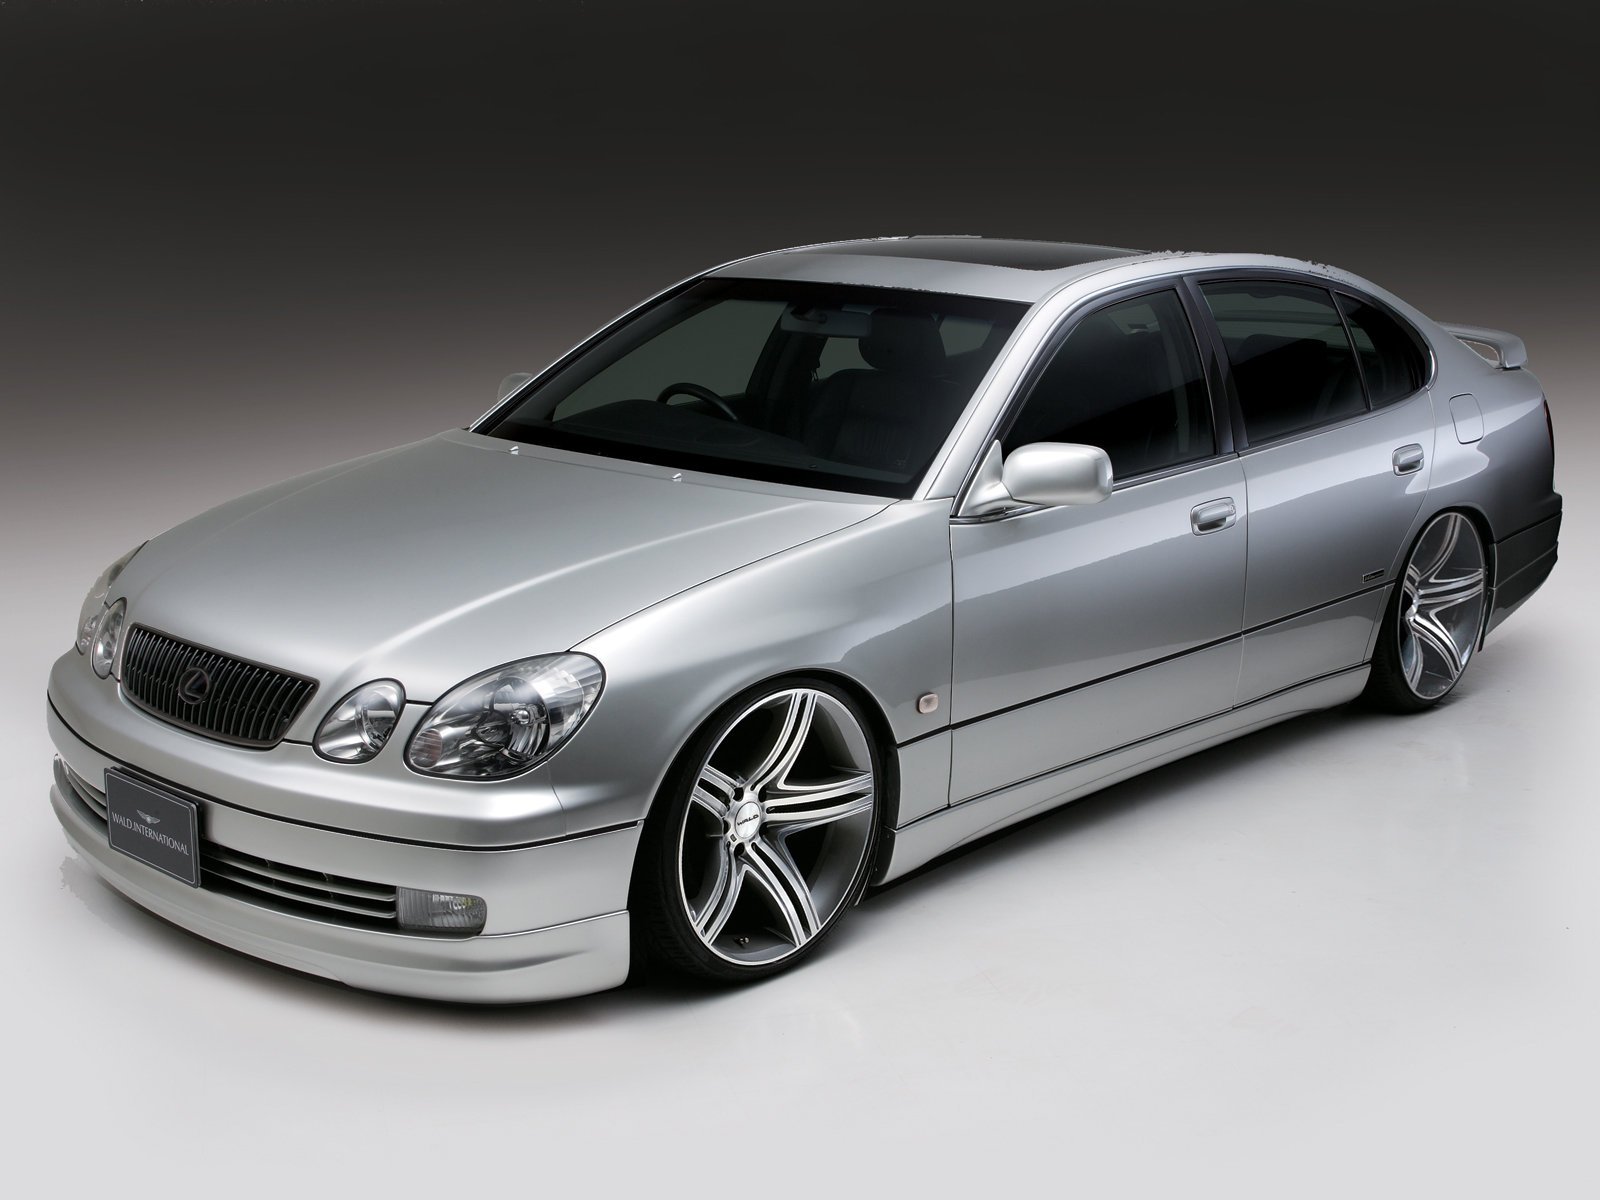 wald, International, Lexus, Gs 430, Cars, Modified, 2002 Wallpapers HD /  Desktop and Mobile Backgrounds